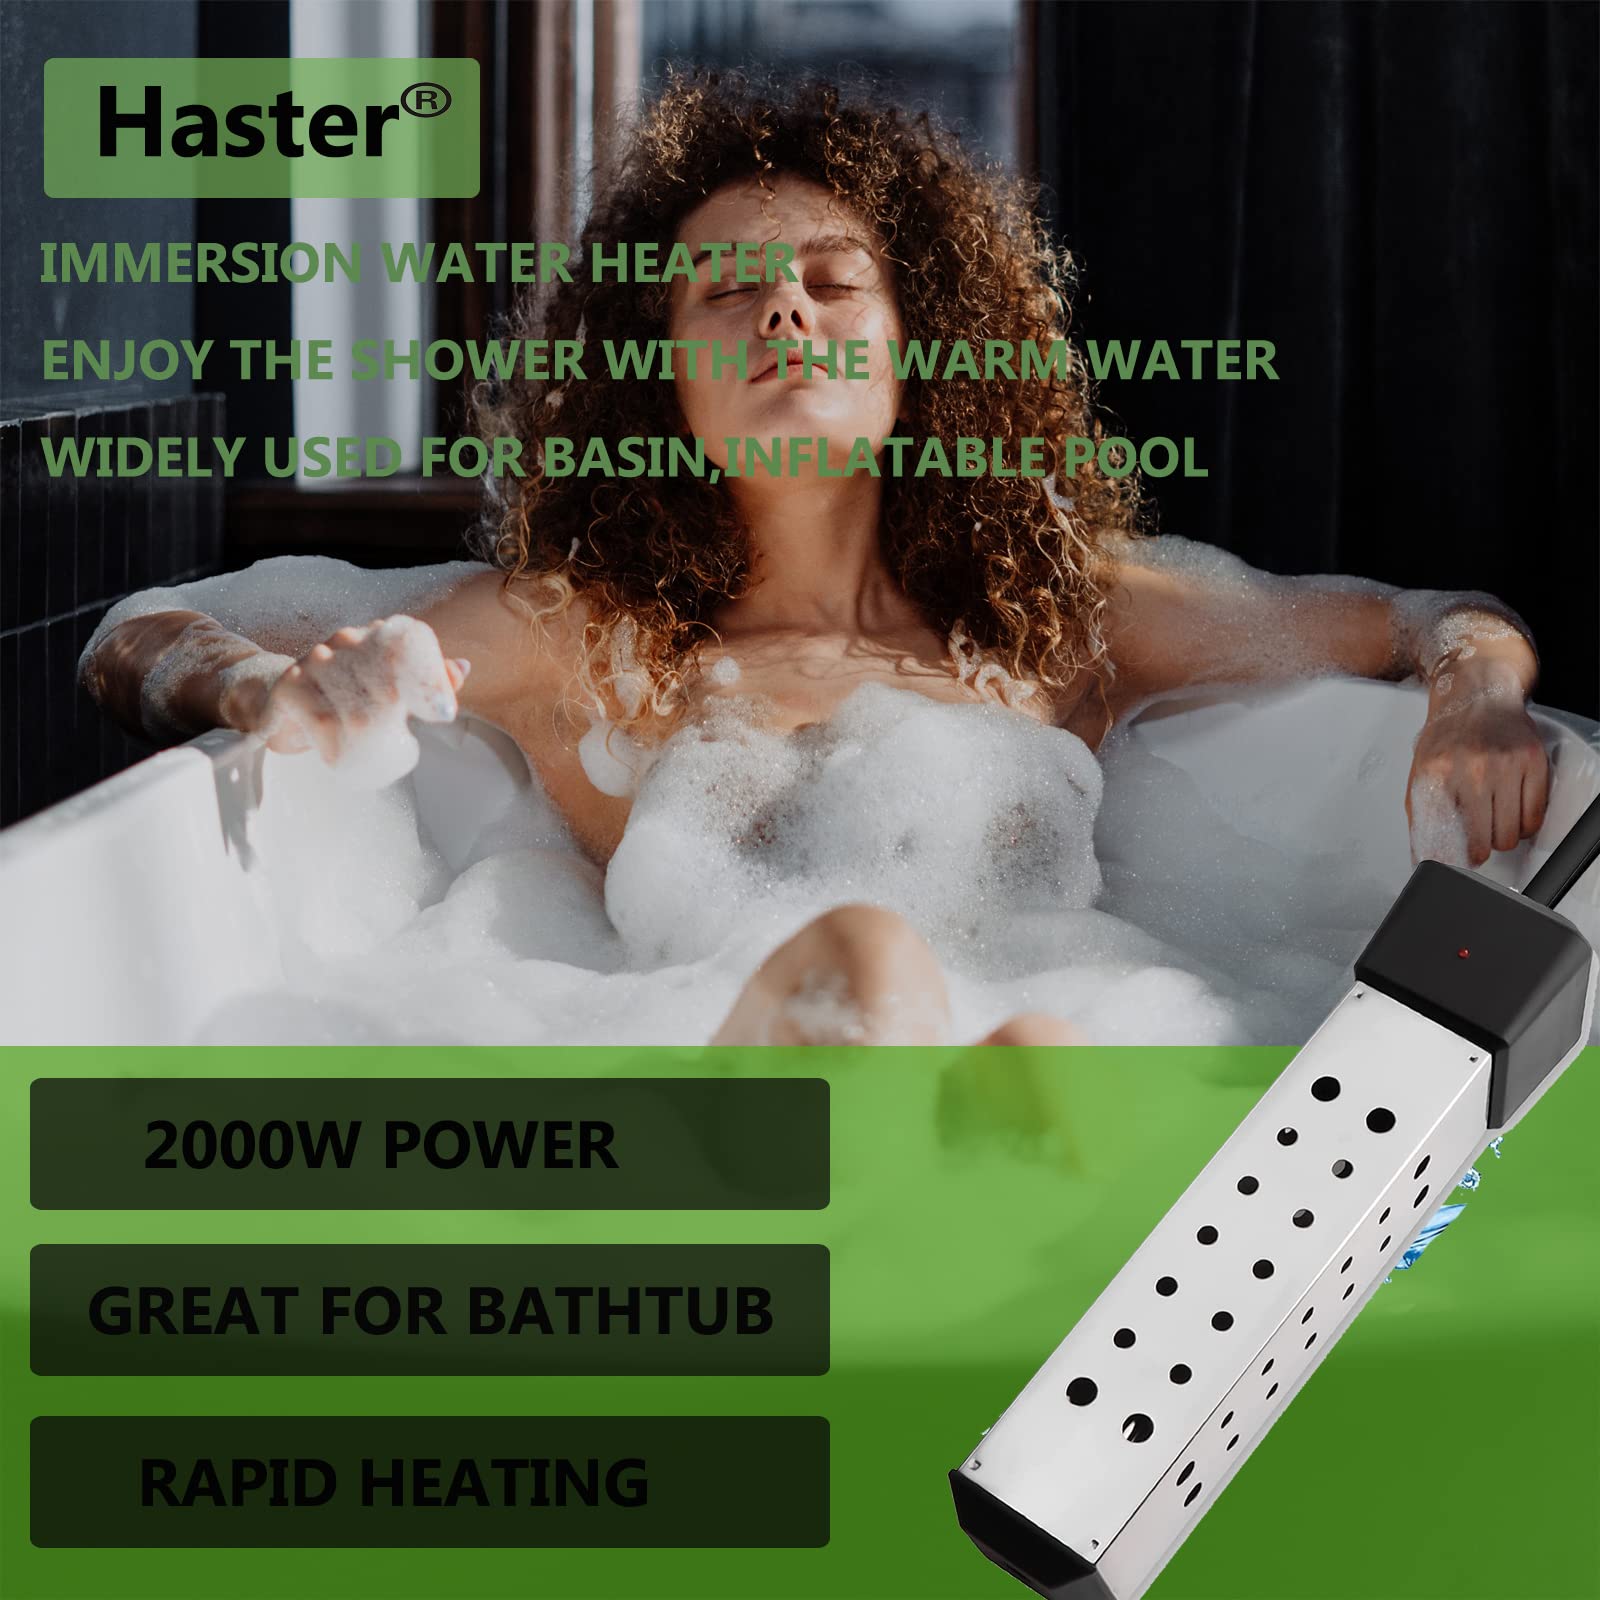 HASTER 2000W Rapid Heating Square Immersion Water Heater for Inflatable Pool Bathtub,Bucket Heater with 304 SS Guard, Submersible Water Heater with LCD Thermometer,Heat 5 Gallon Water in Minutes